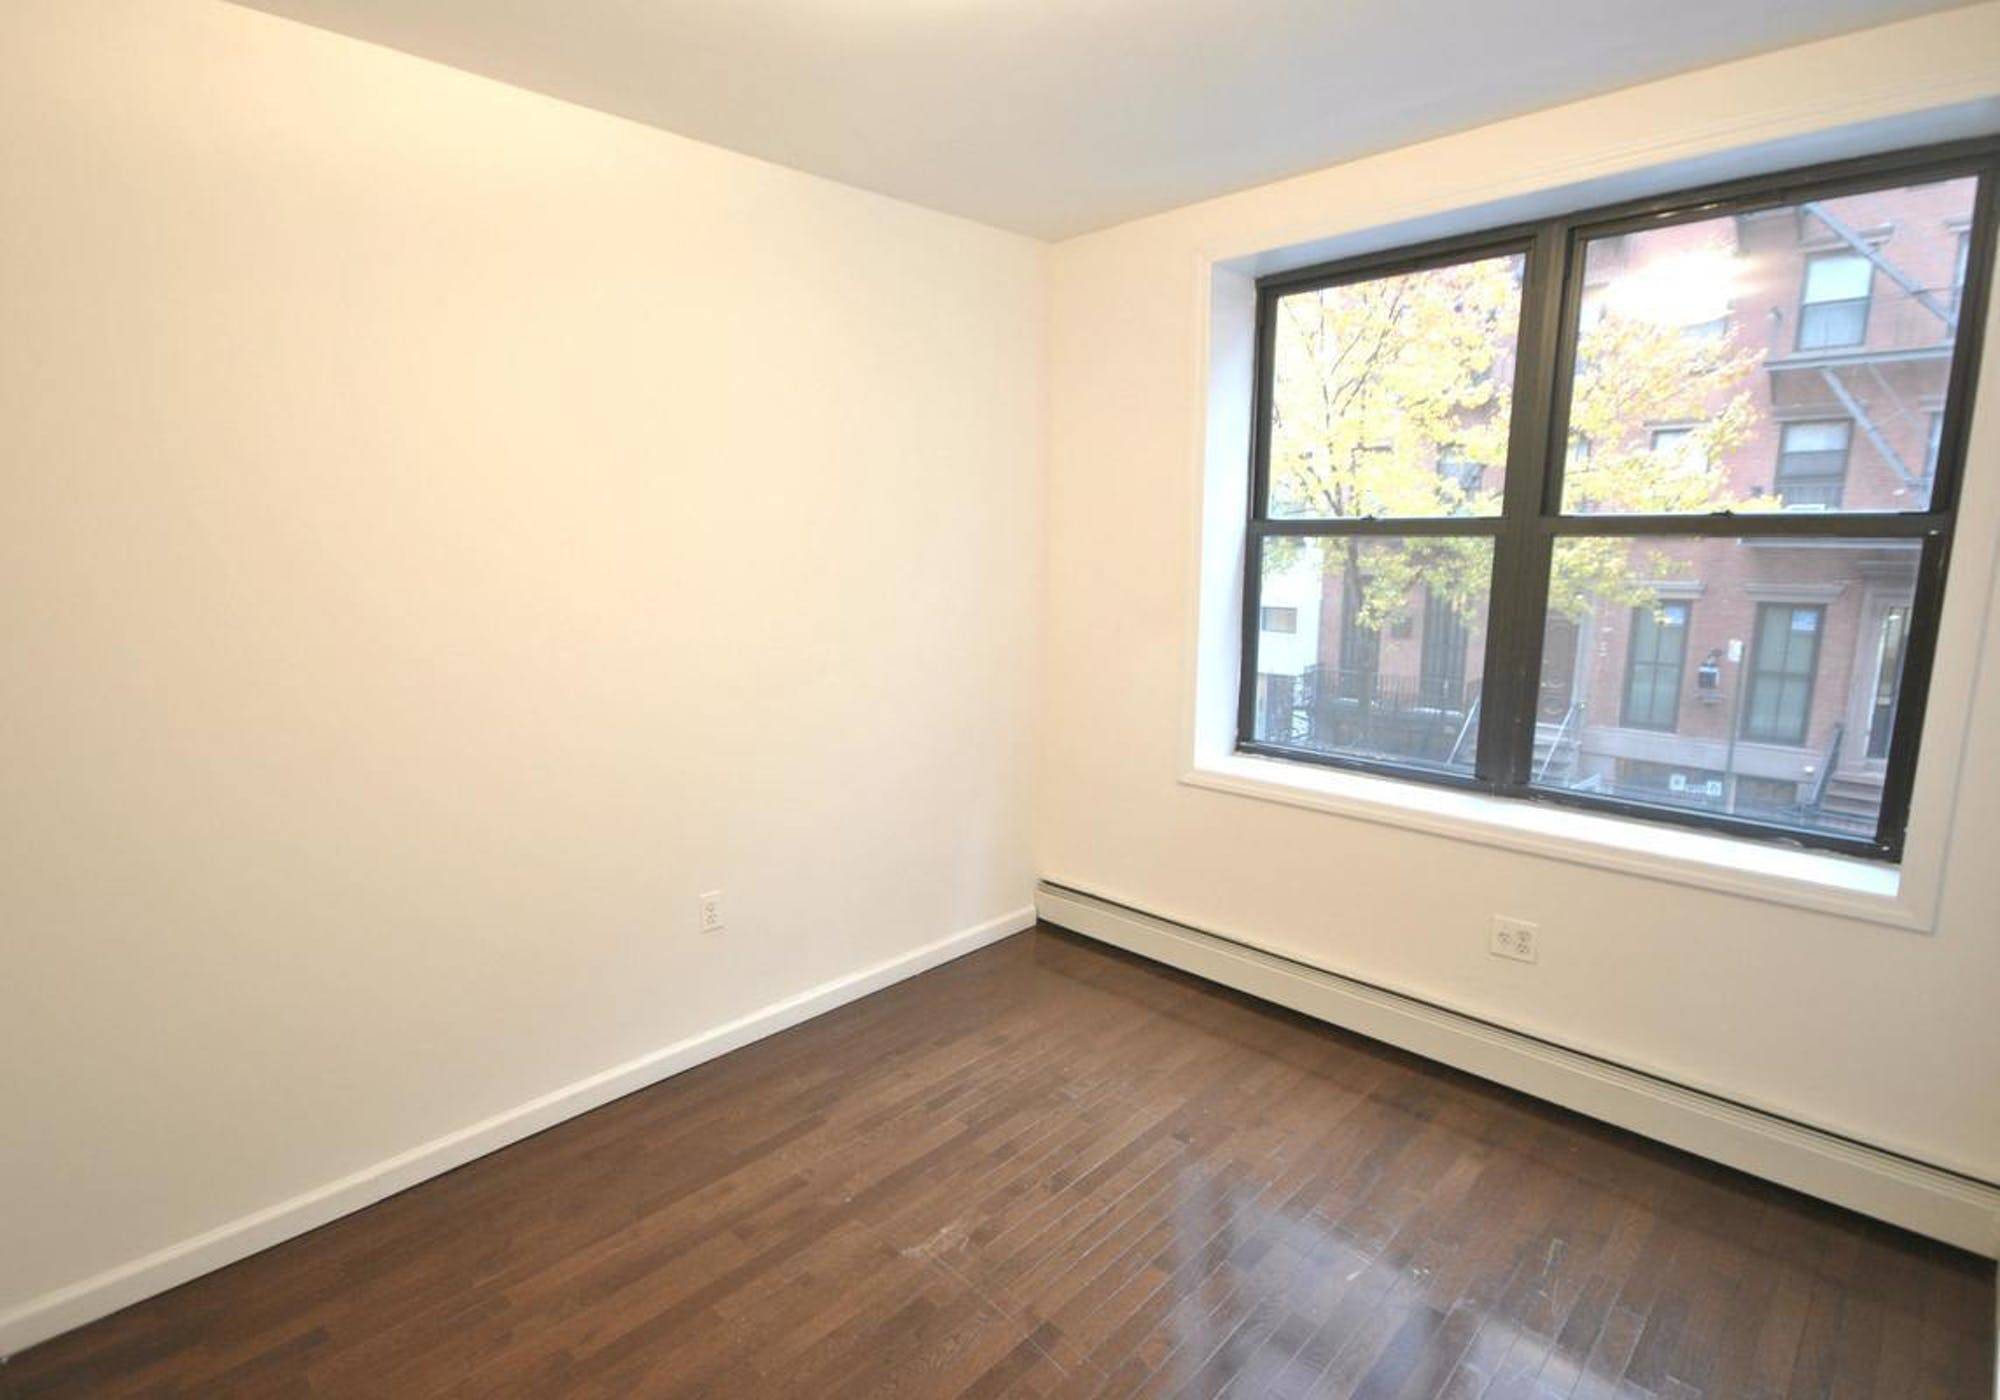 Large and Renovated True 1 bedroom in the Heart of Murray Hill with Private Outdoor Space.